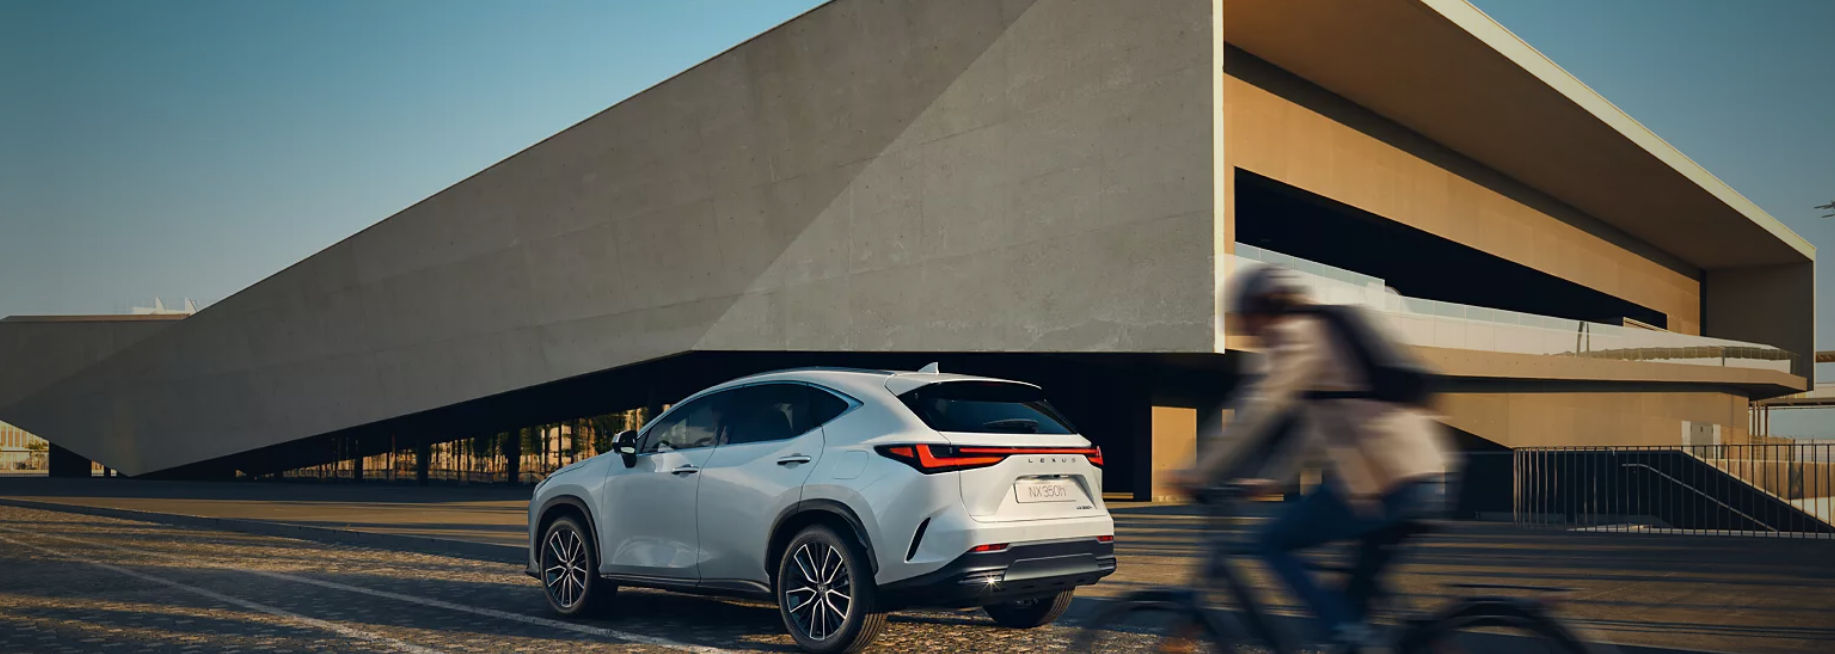 A white Lexus NX on a city street, showcasing its sleek design and urban appeal.